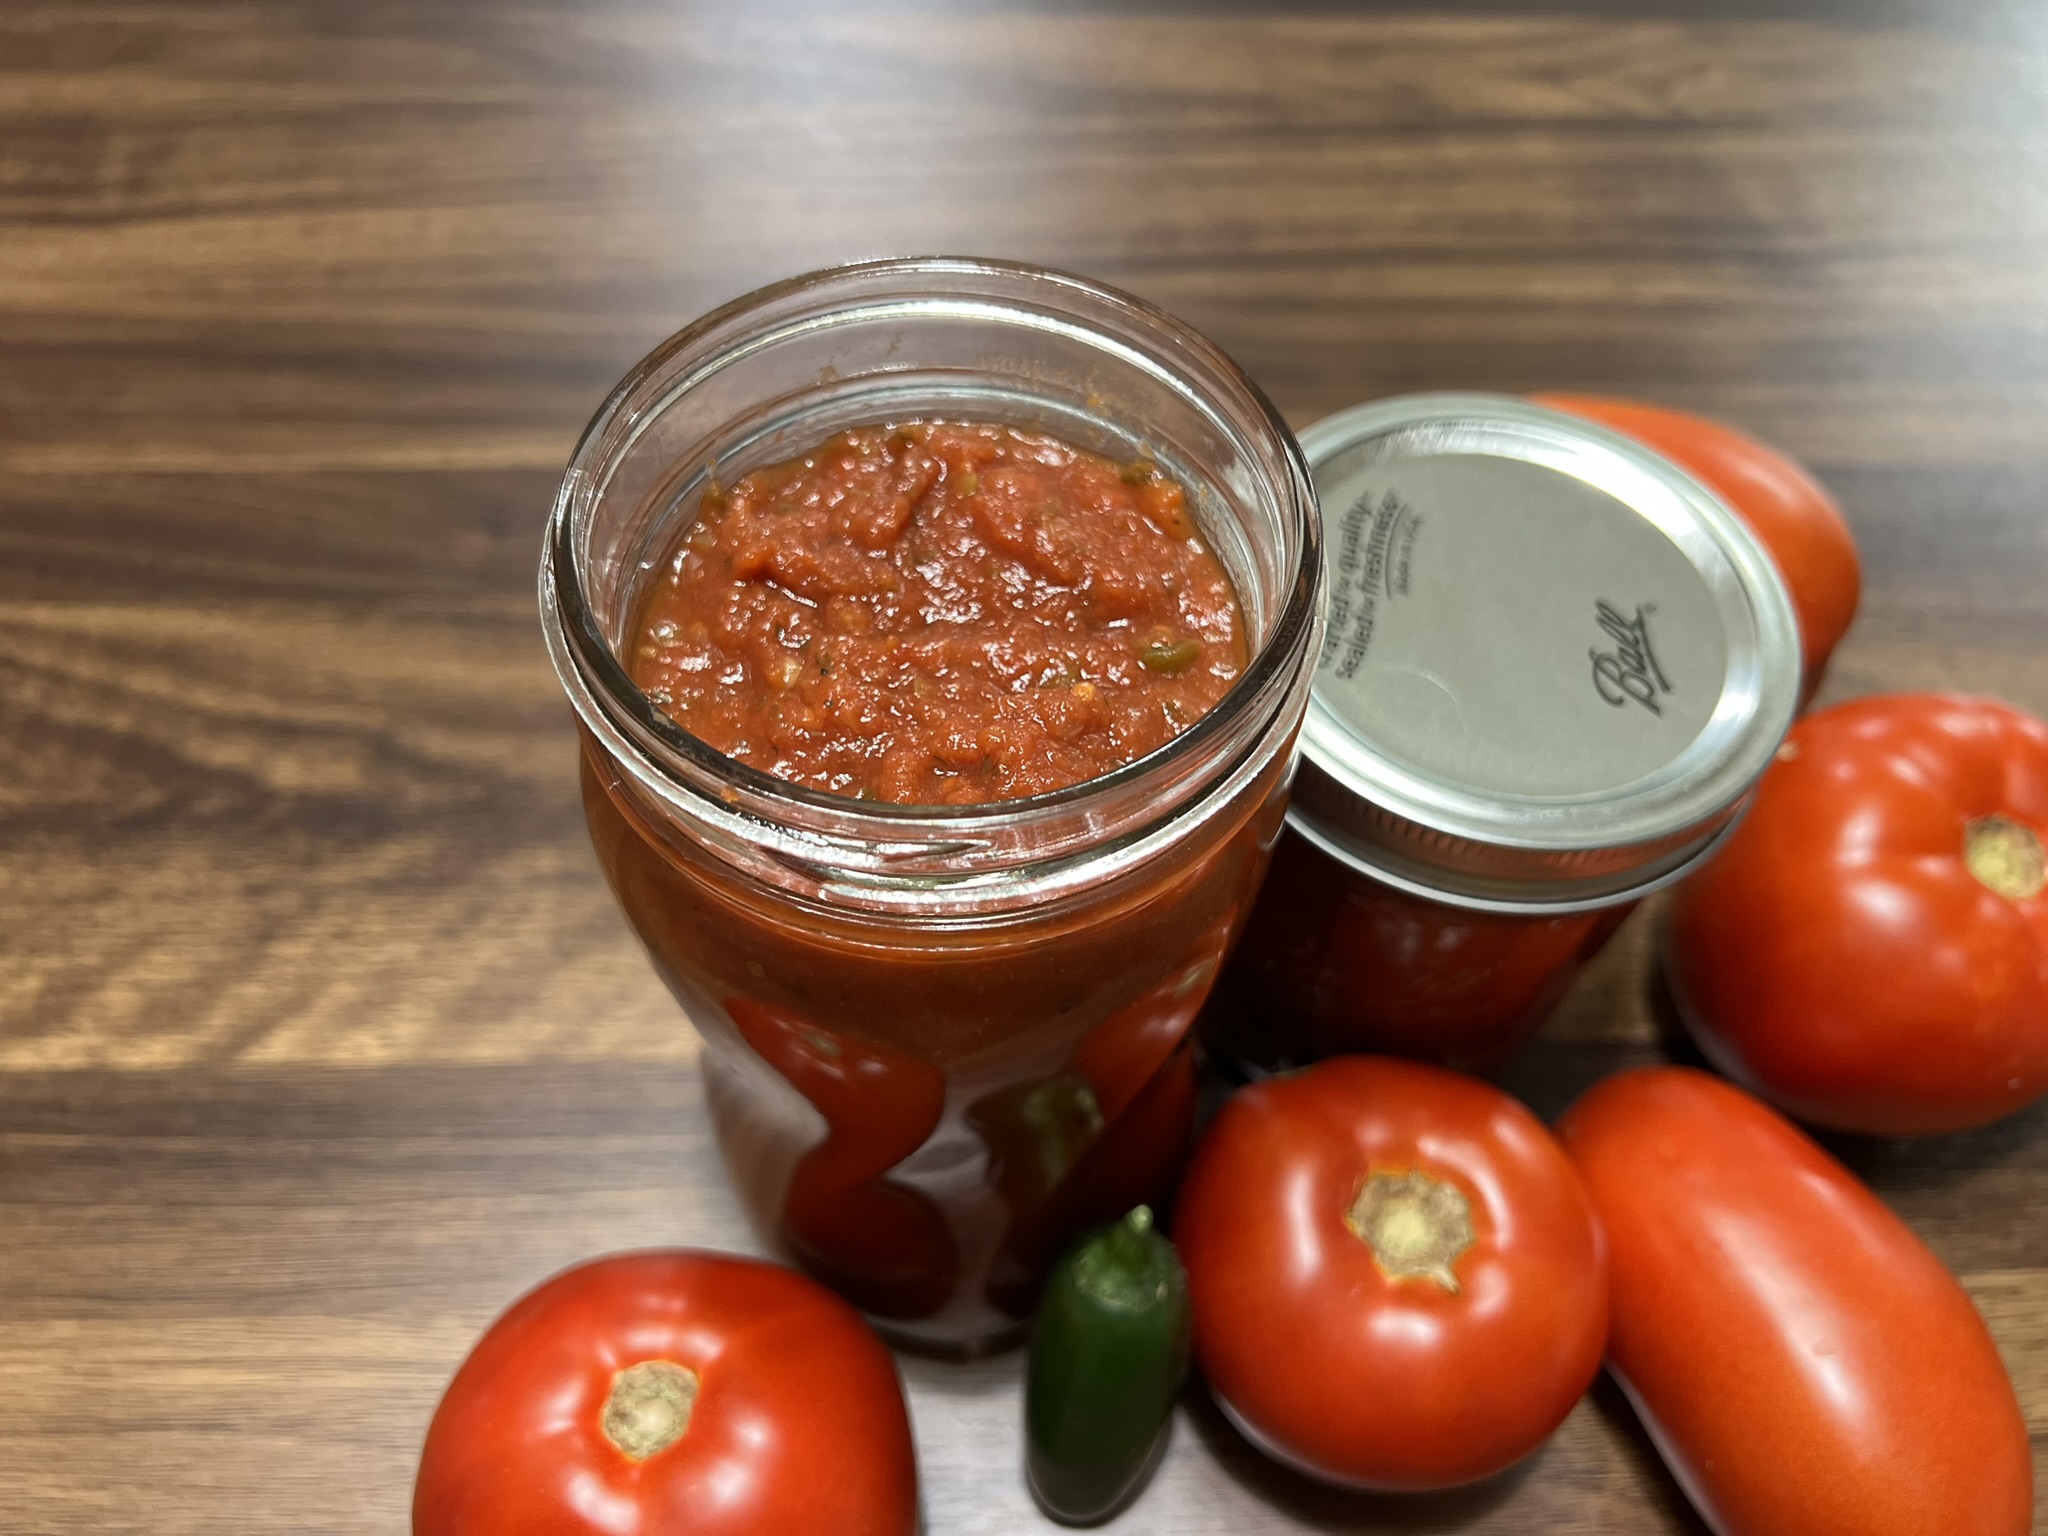 A jar of spaghetti sauce sits ready for a lid.  The jar is surrounded by beautiful tomatoes.